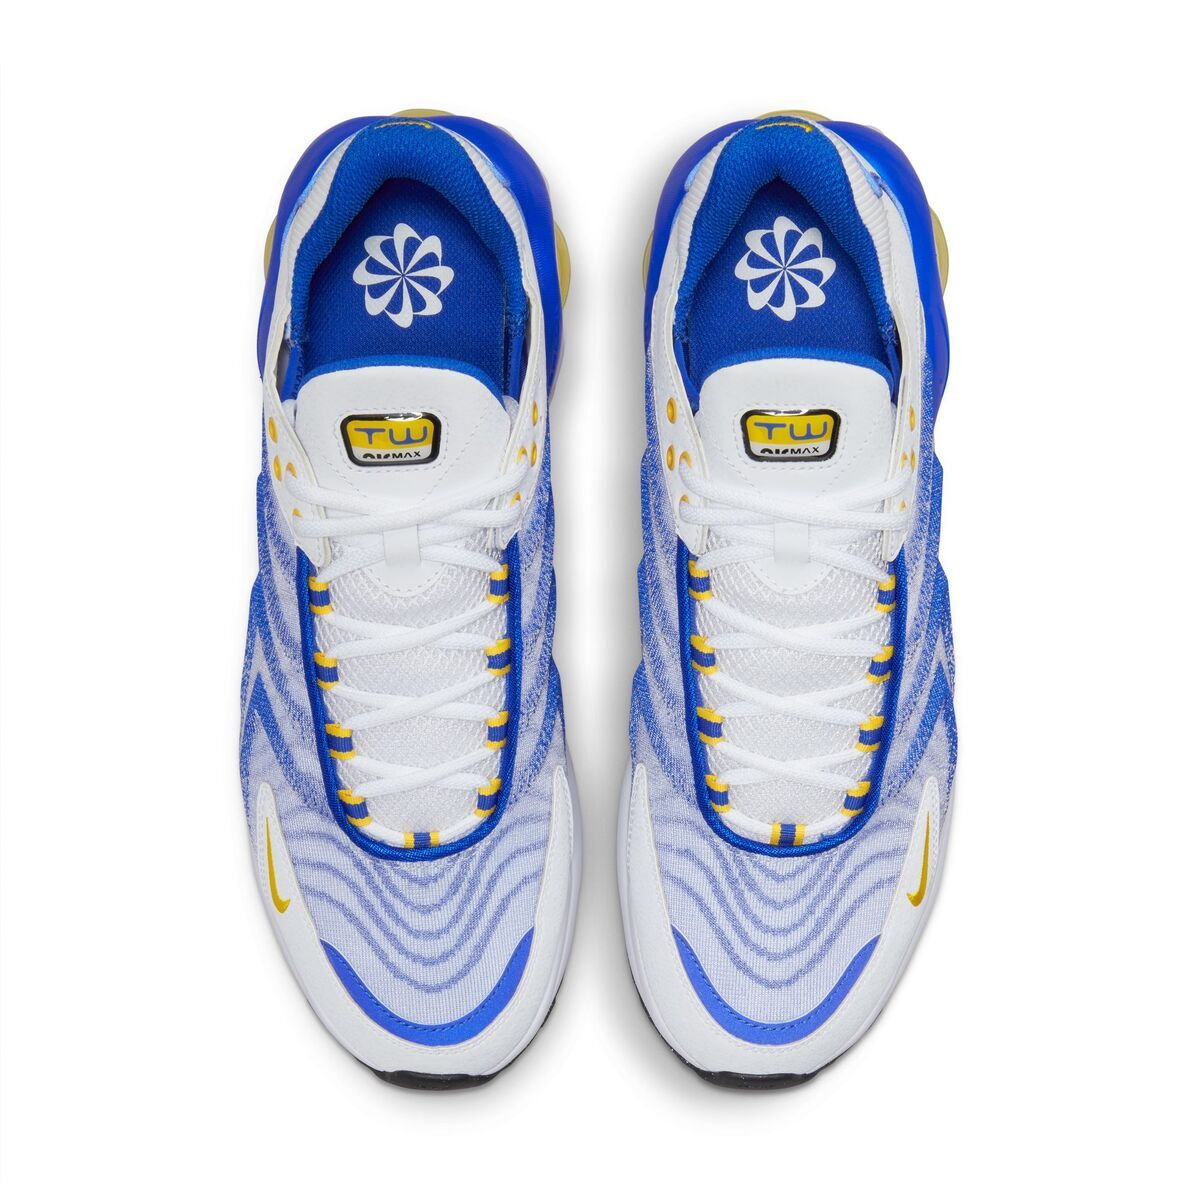 Air Max TW - Racer Blue and Speed Yellow